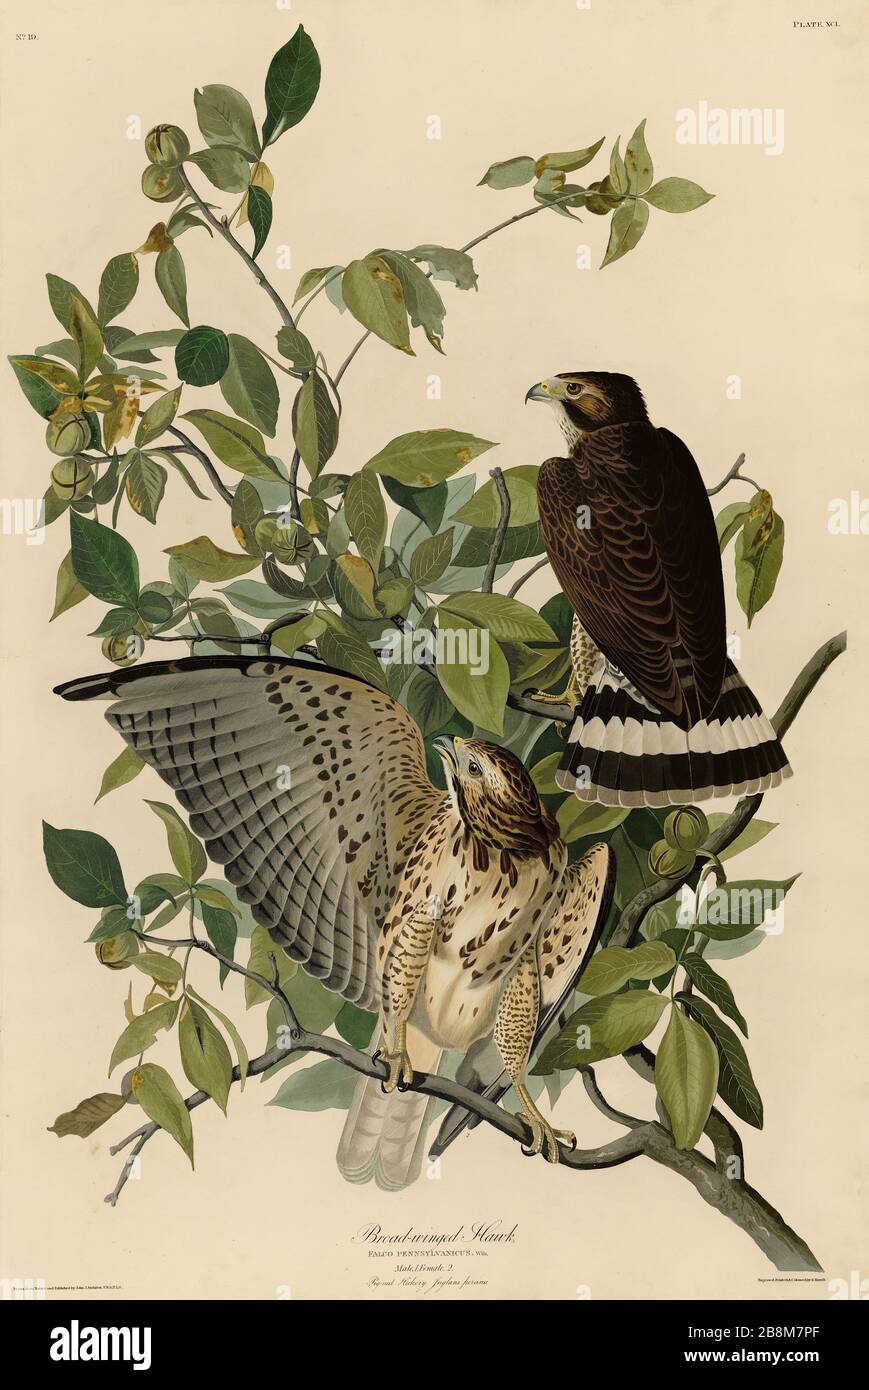 Plate 91 Broad-winged Hawk, from The Birds of America folio (1827–1839) by John James Audubon - Very high resolution and quality edited image Stock Photo